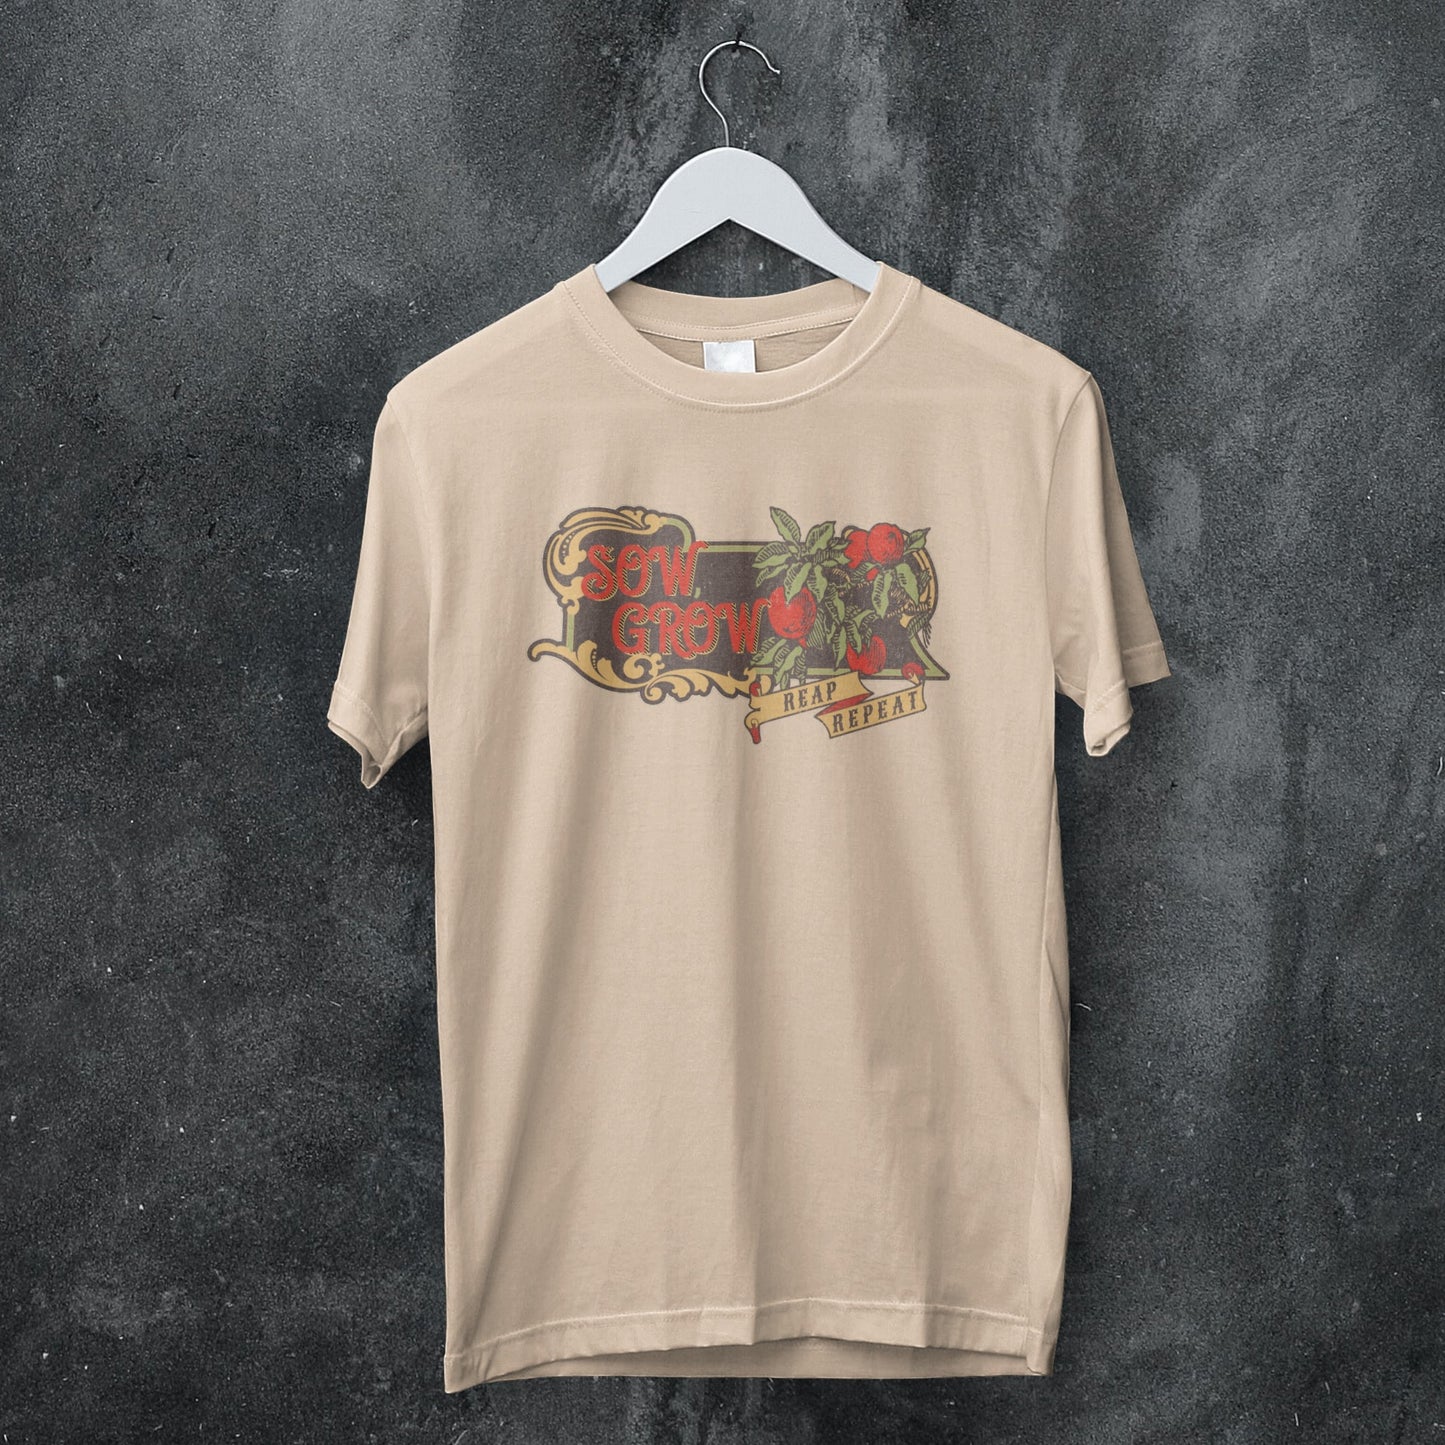 Sow Grow Reap Repeat graphic T-shirt - Tortuna